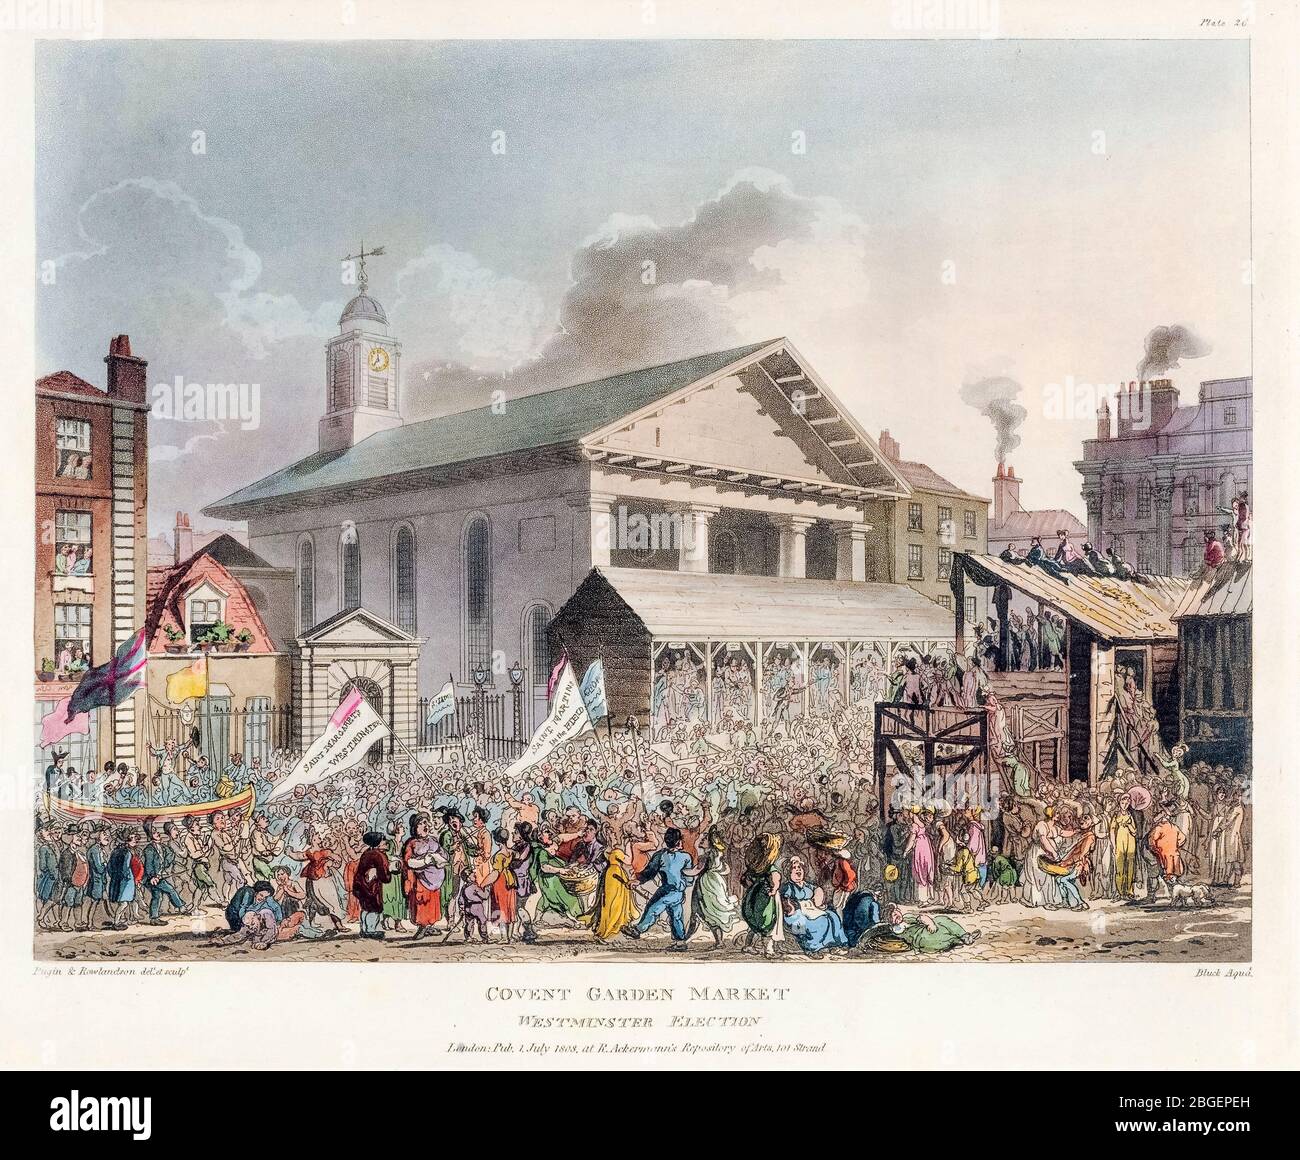 Covent Garden Market: Westminster Election, etching by Thomas Rowlandson, Augustus Charles Pugin, 1808-1810 Stock Photo